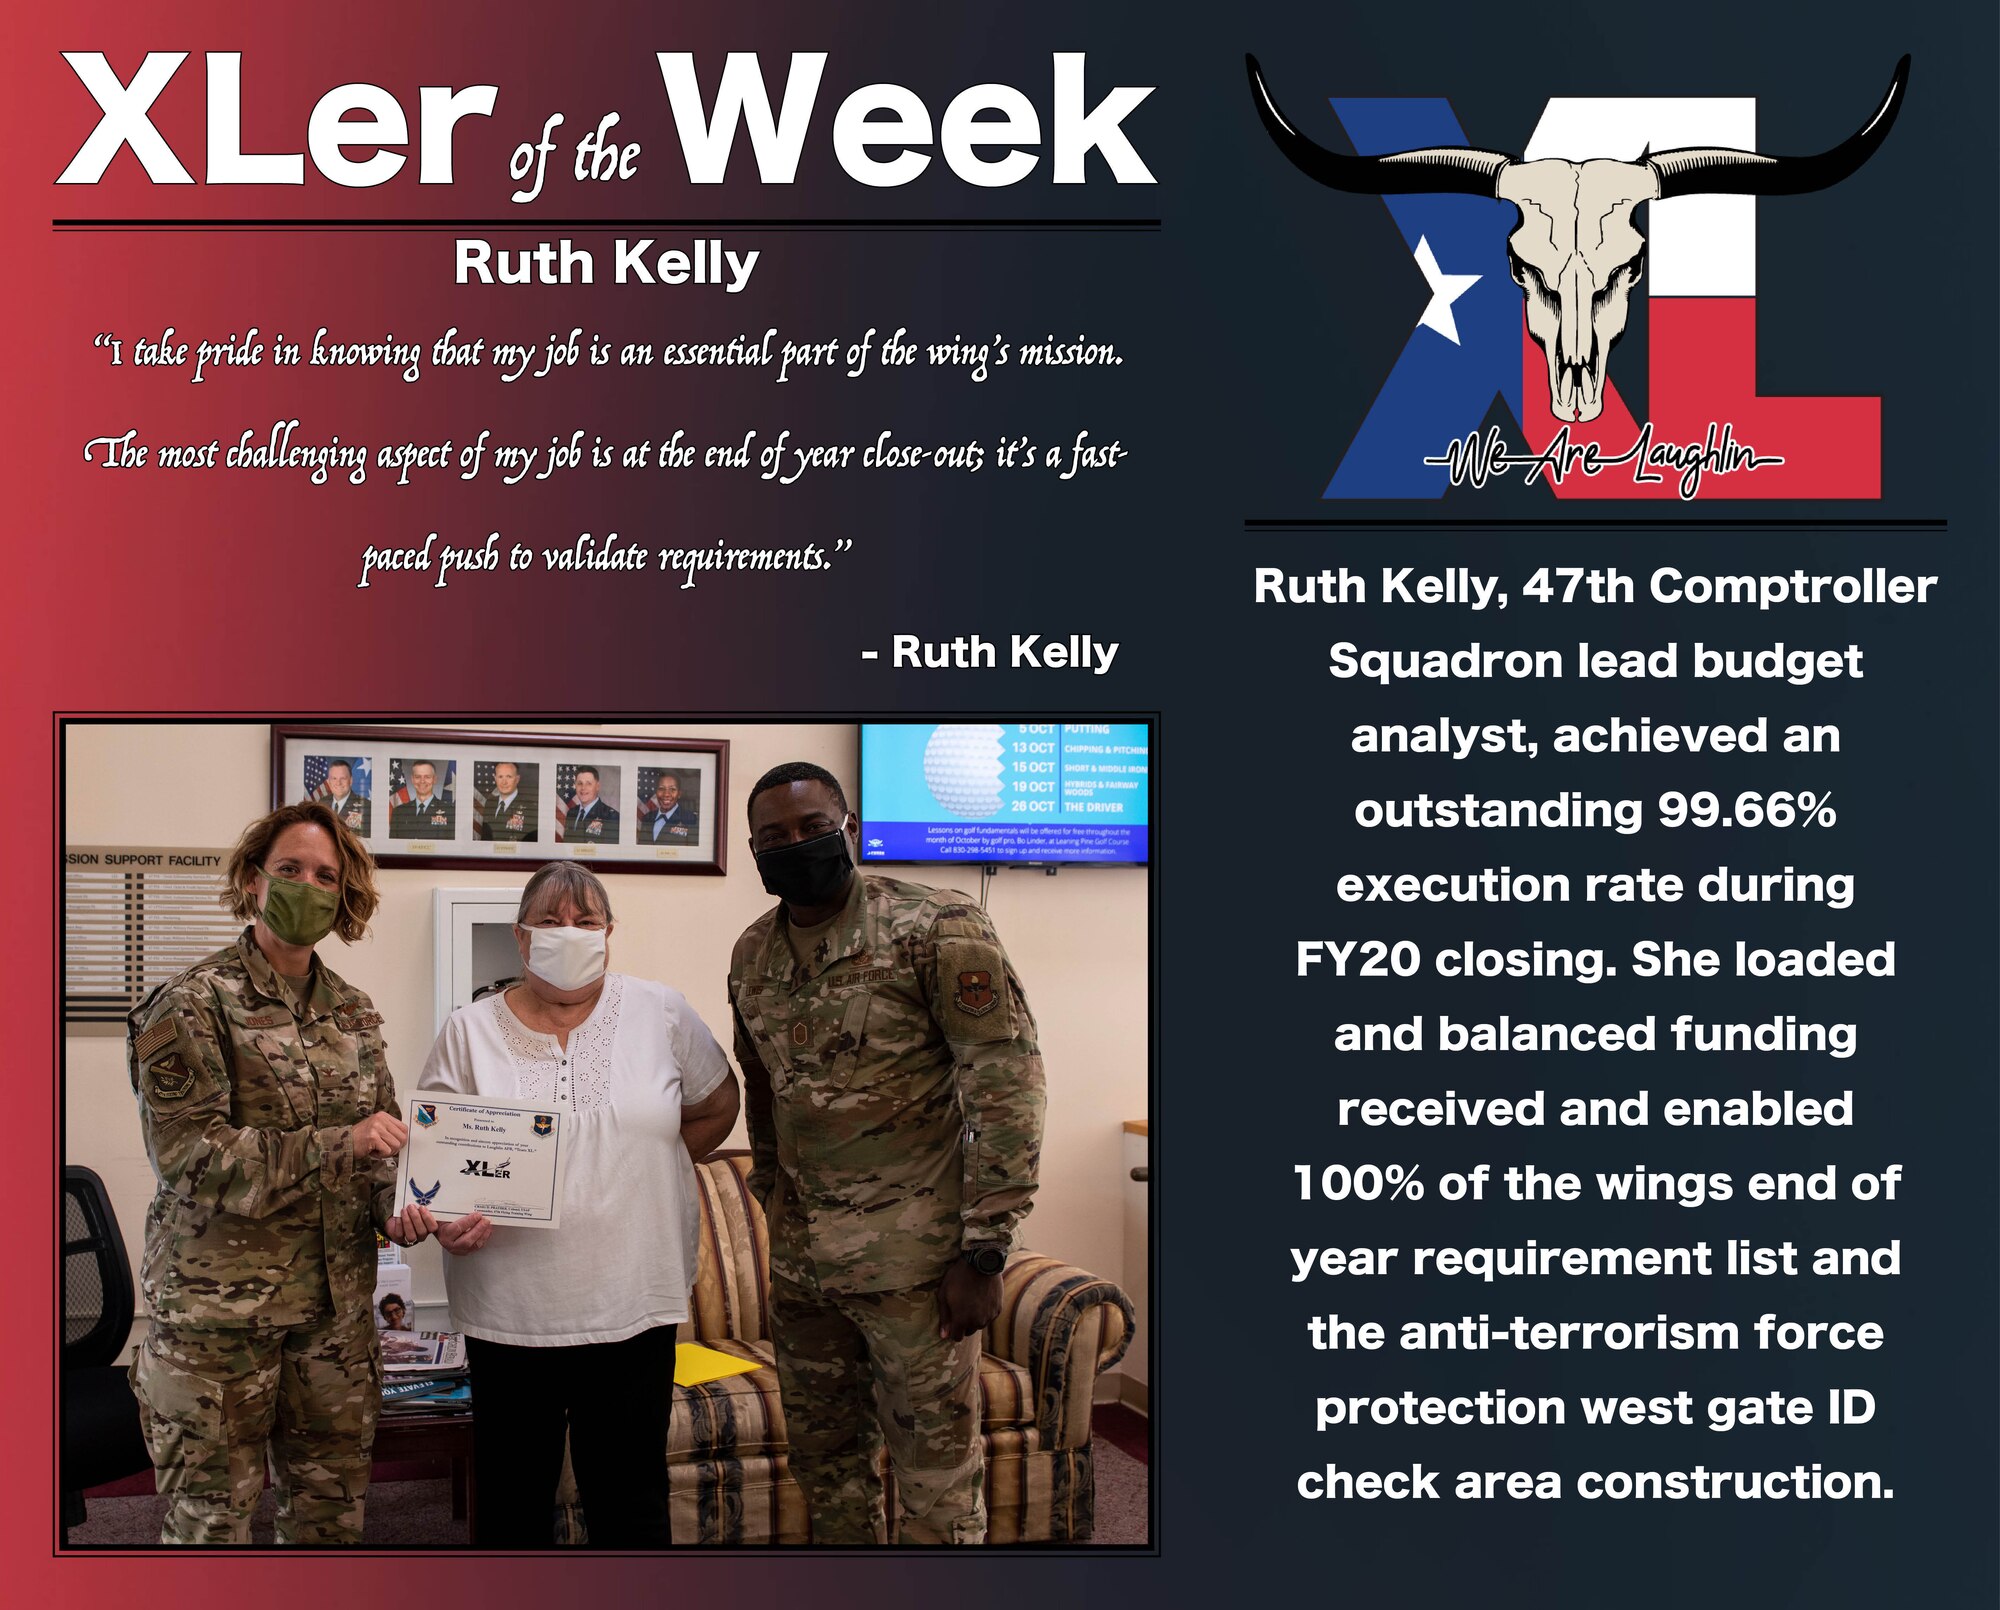 Ruth Kelly, 47th Comptroller Squadron lead budget analyst, was chosen by wing leadership to be the “XLer of the Week”, the week of Oct. 21, 2020, at Laughlin Air Force Base, Texas. The “XLer” award, presented byCol. Cary Jones, 47th Flying Training Wing vice commander, and Chief Master Sgt. Brian Lewis, 47th Operations Group superintendent, is given to those who consistently make outstanding contributions to their unit and the Laughlin mission. (U.S. Air Force Graphic by Airman 1st Class David Phaff)